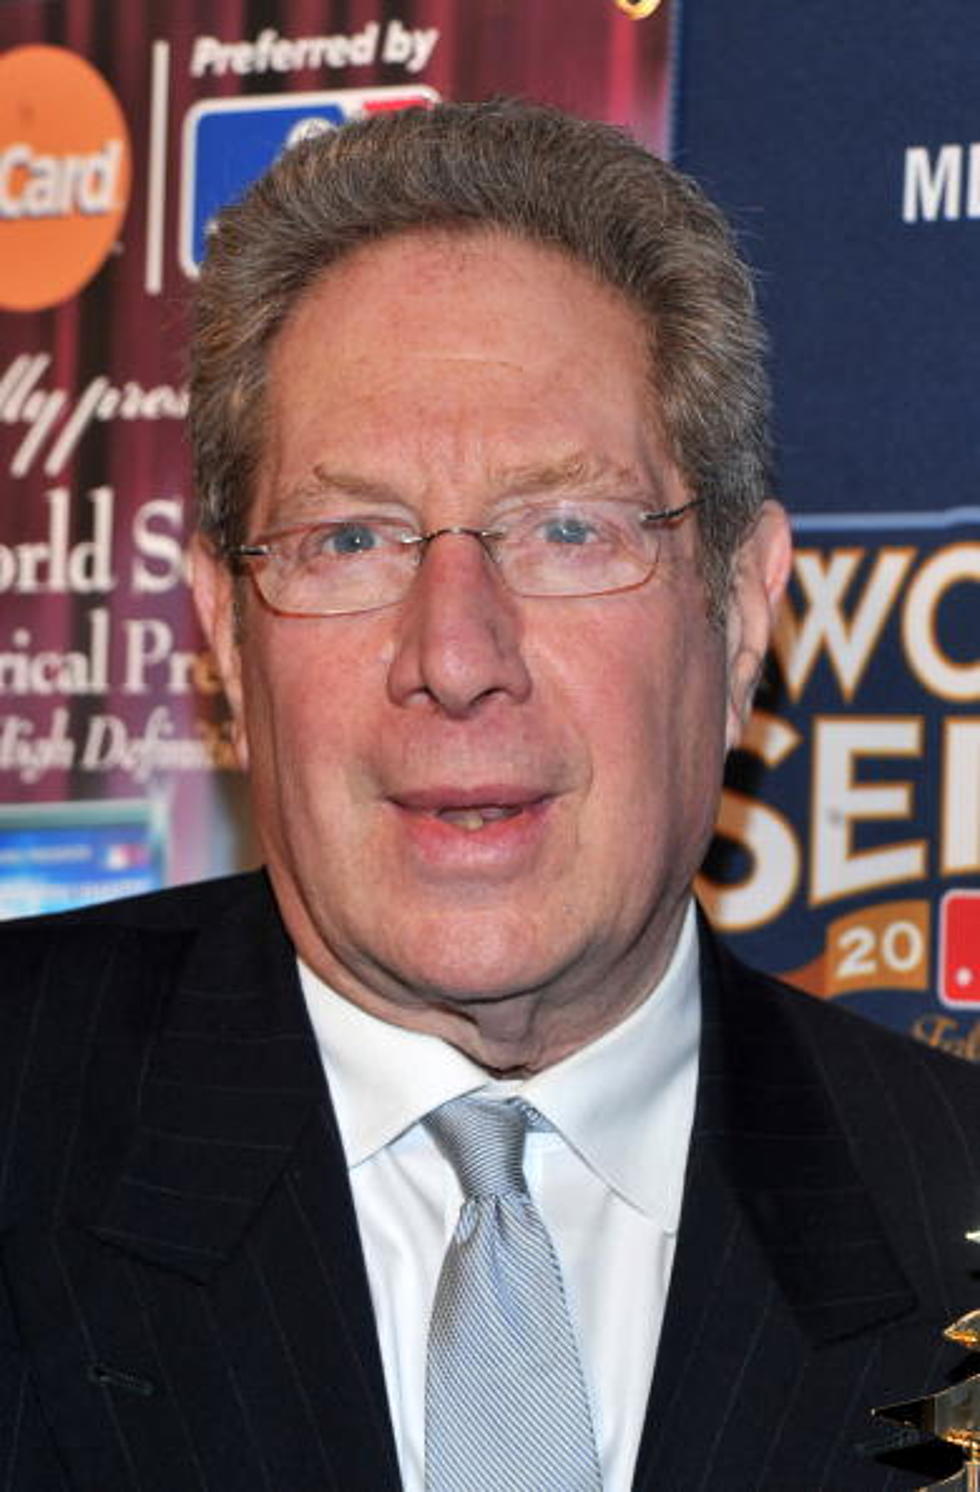 HBO’s Real Sports Profiles John Sterling